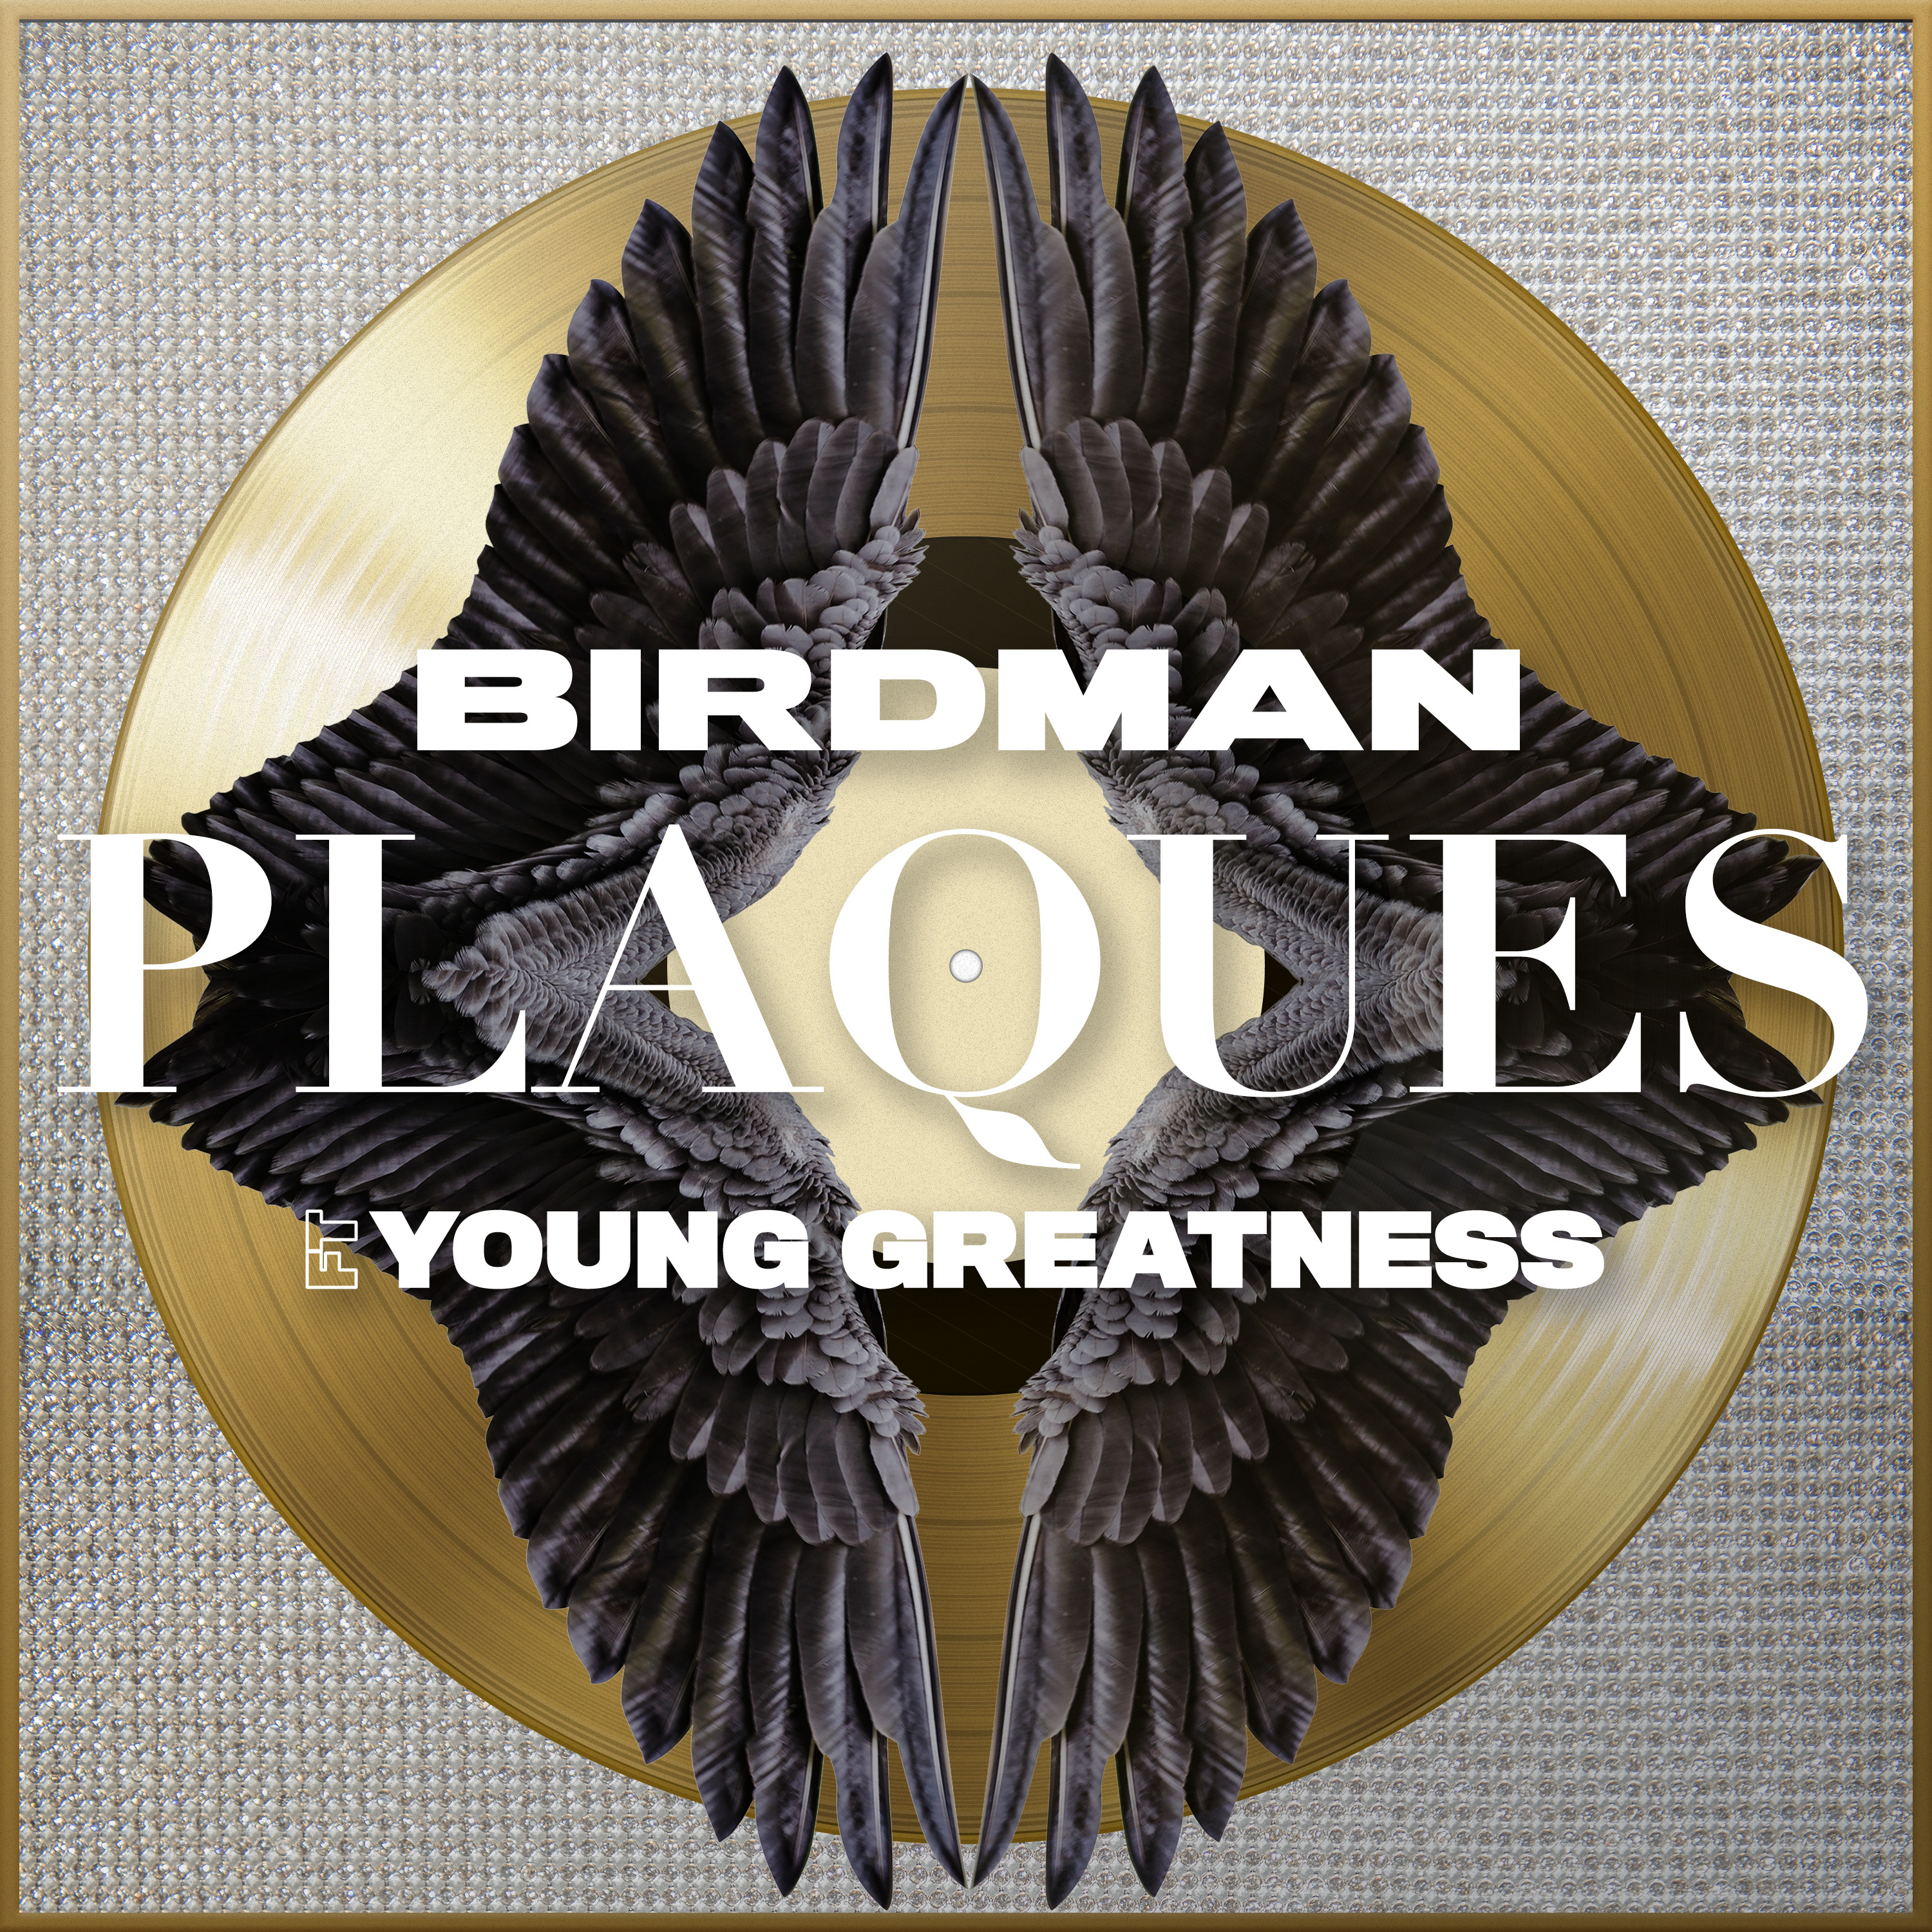 Birdman Releases New Single “Plaques” With Young Greatness